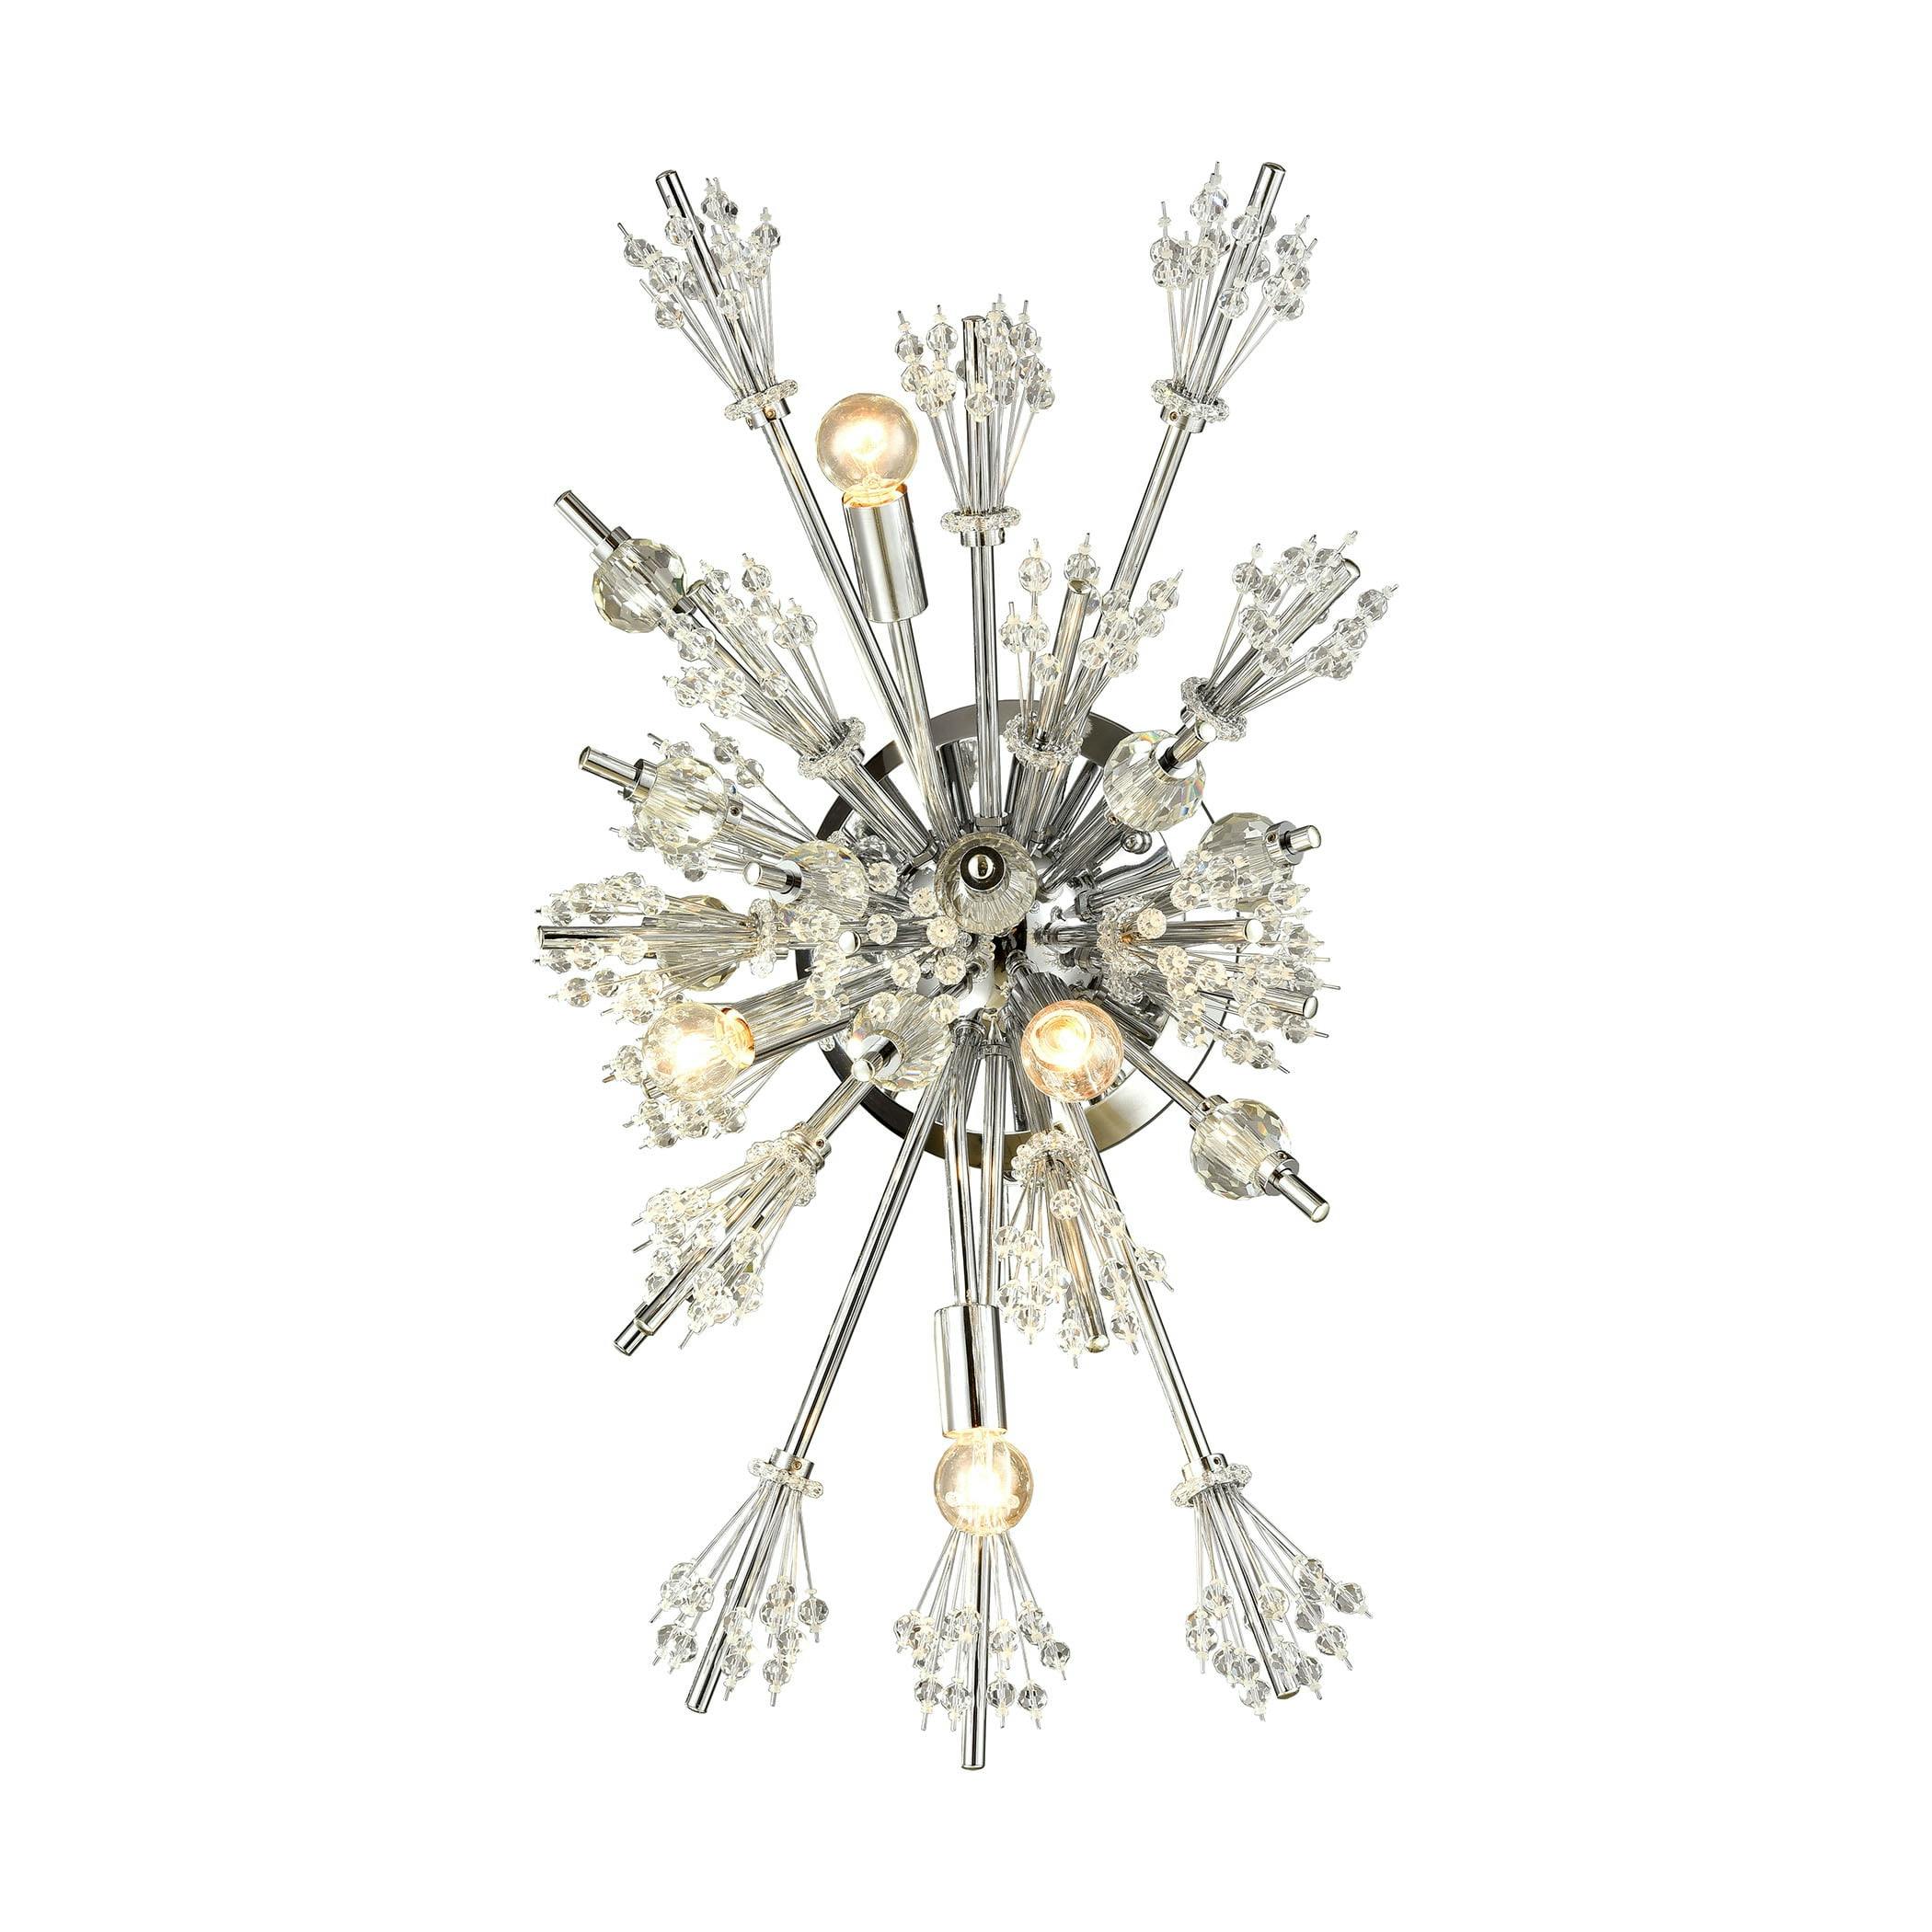 Celestial Chrome 4-Light Polished Sconce with Faceted Crystal Balls